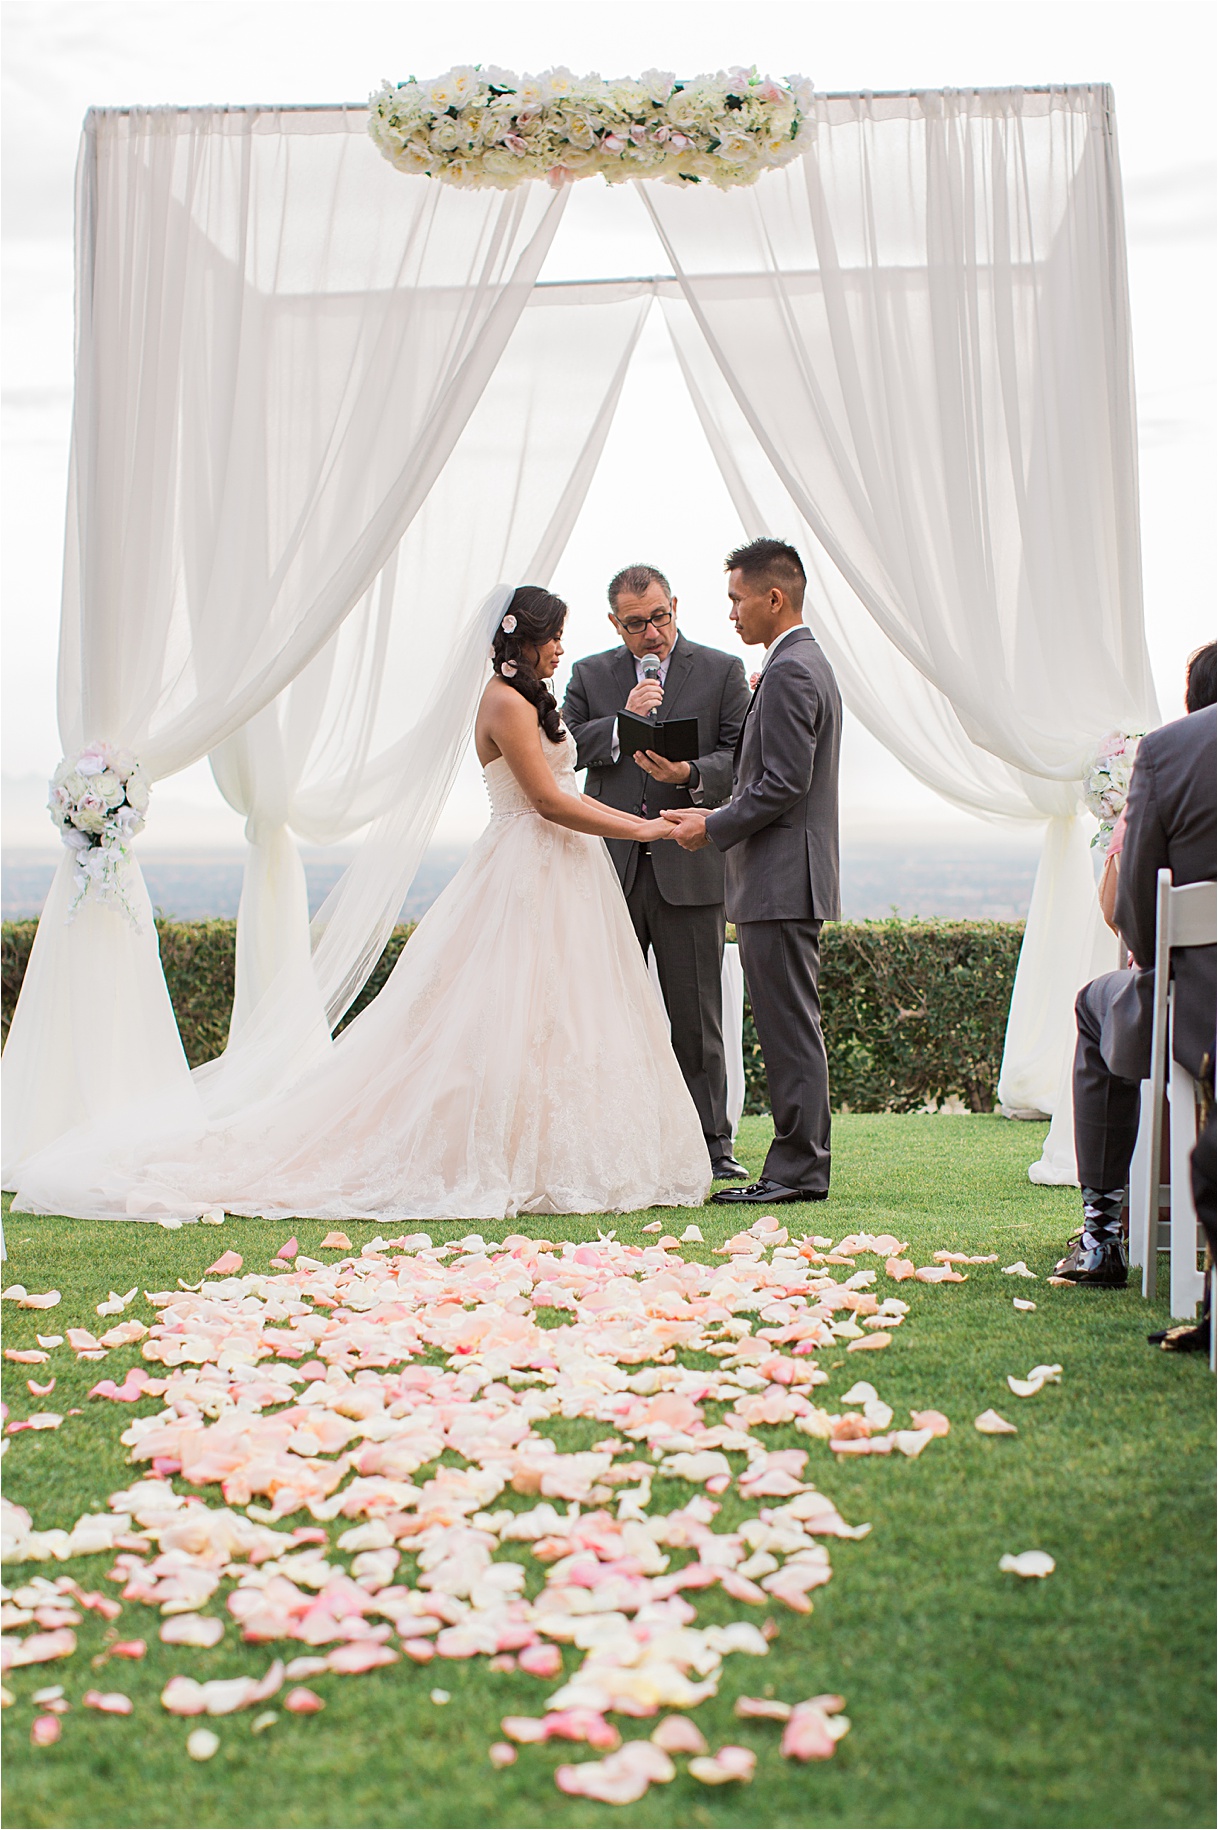 Ceremony with pink rose petals covering the aisle.